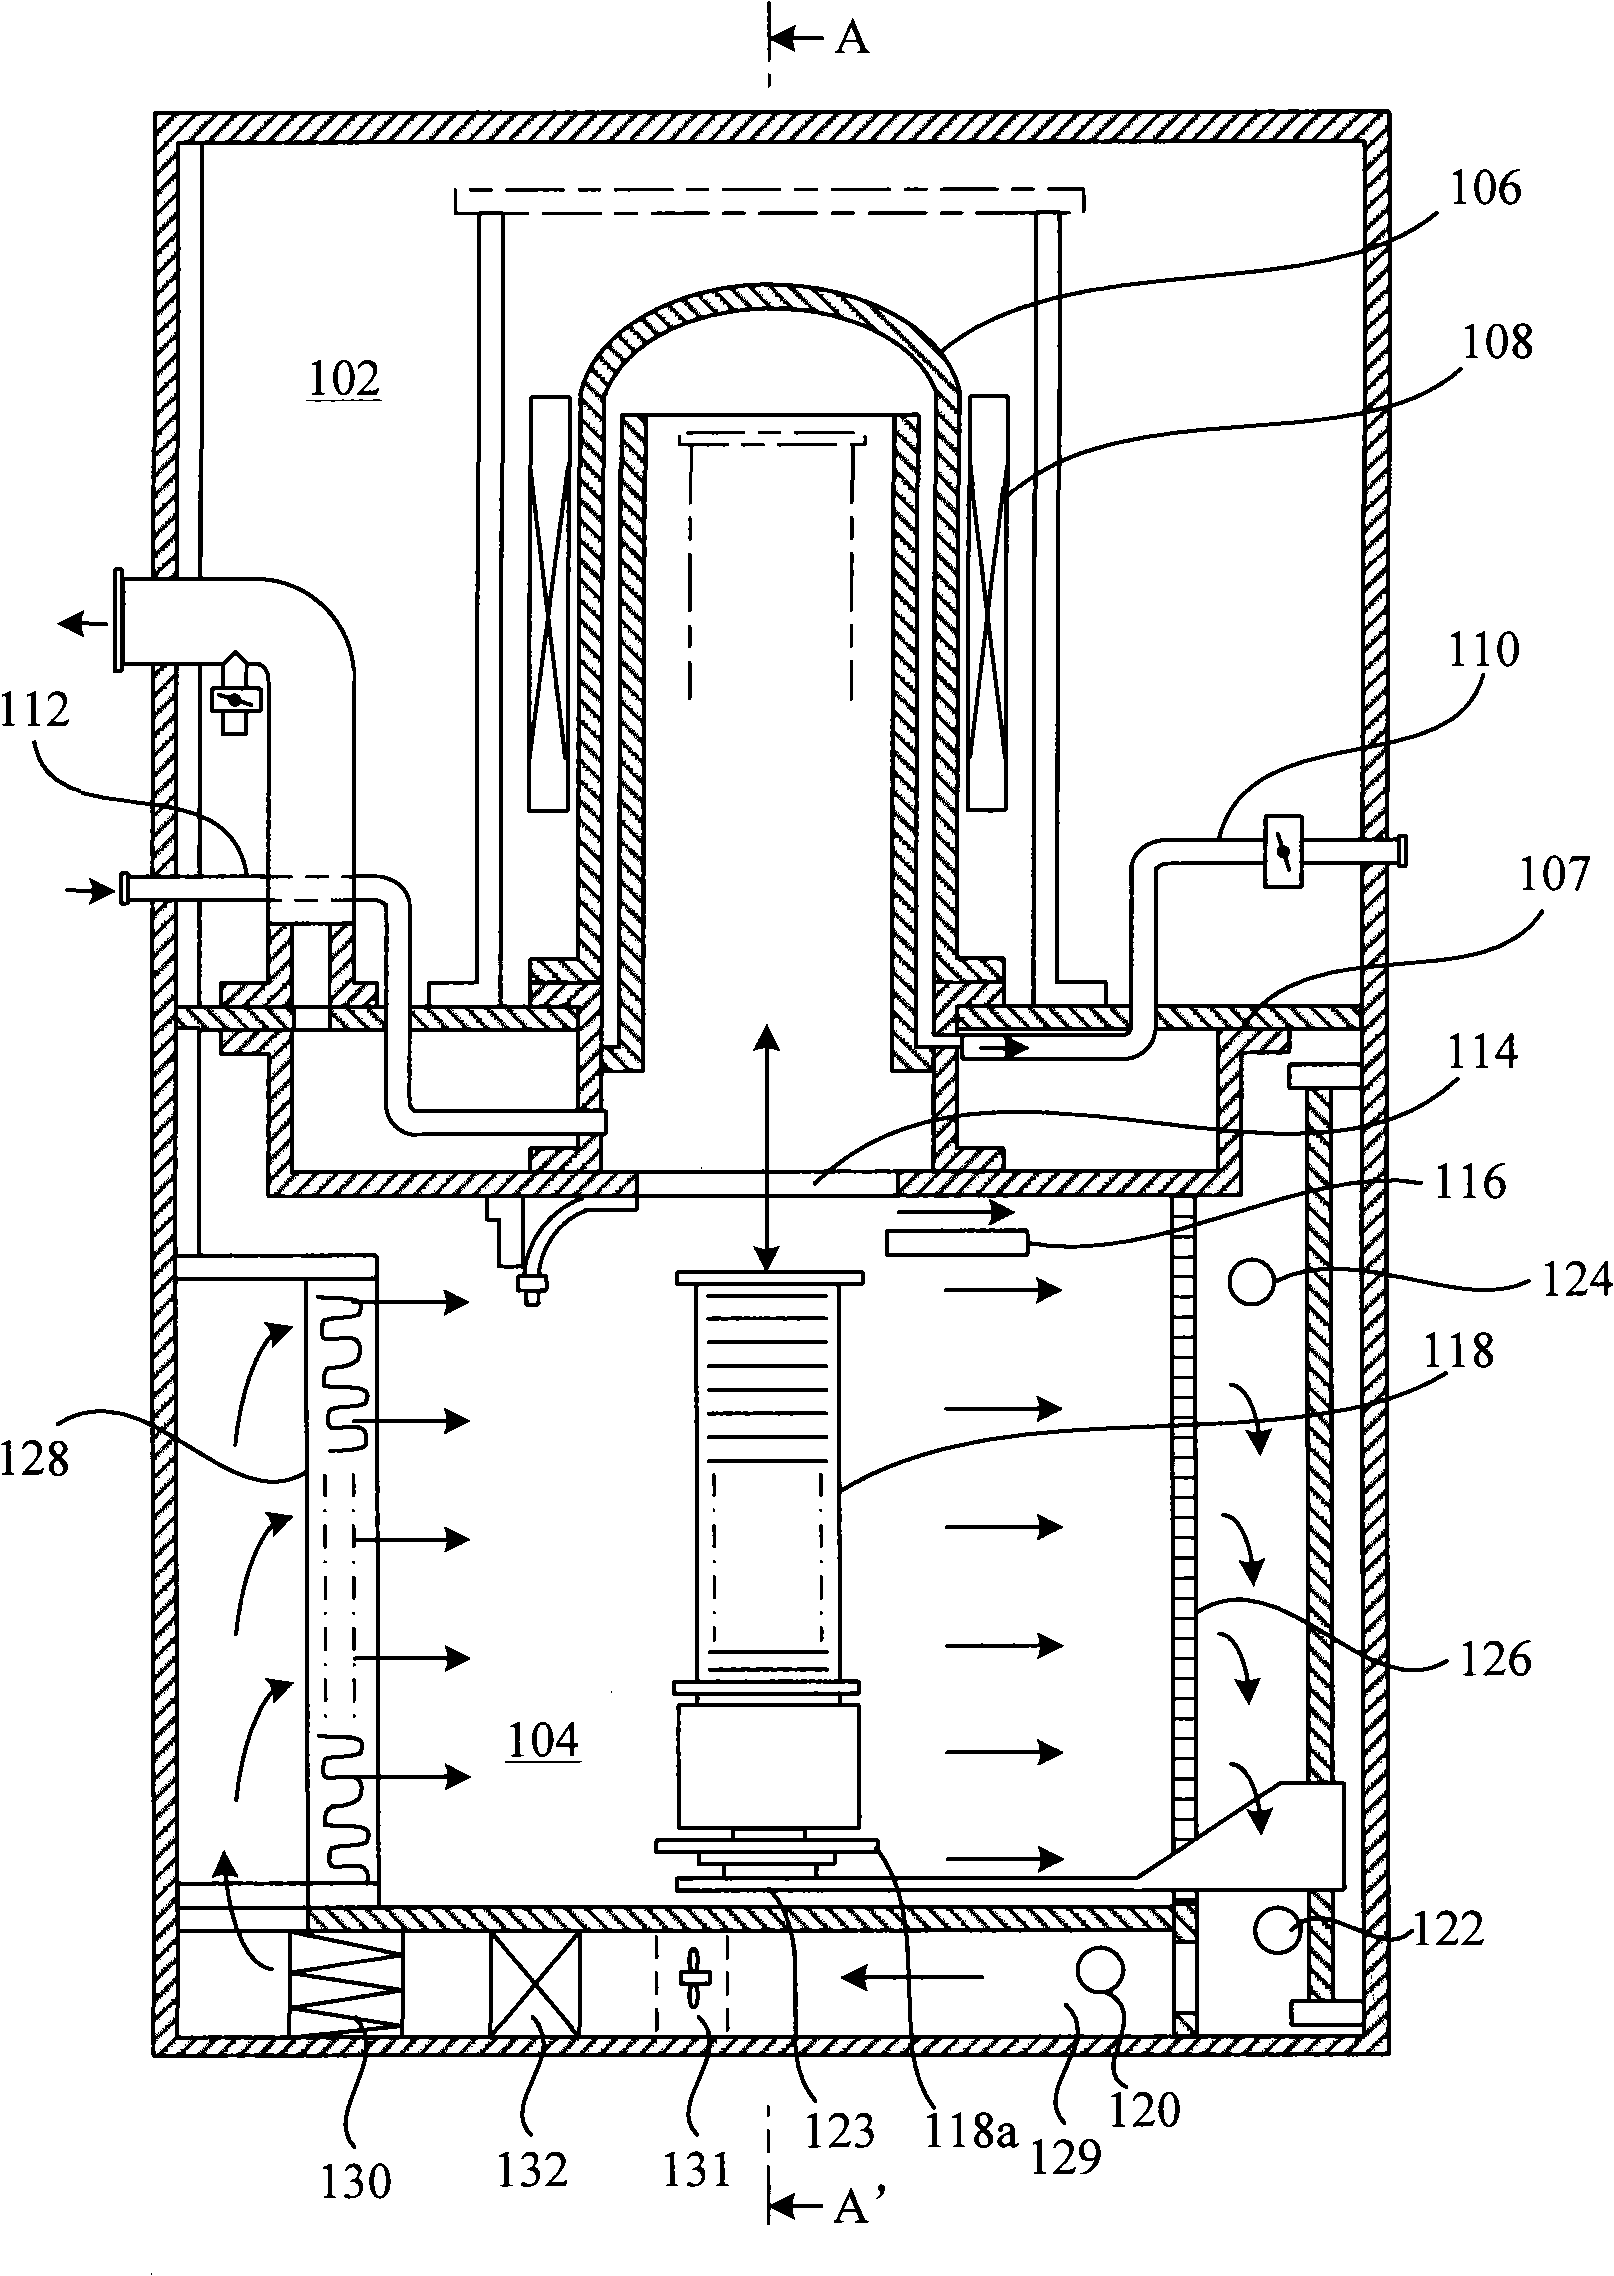 Apparatus for heat treatment of wafer